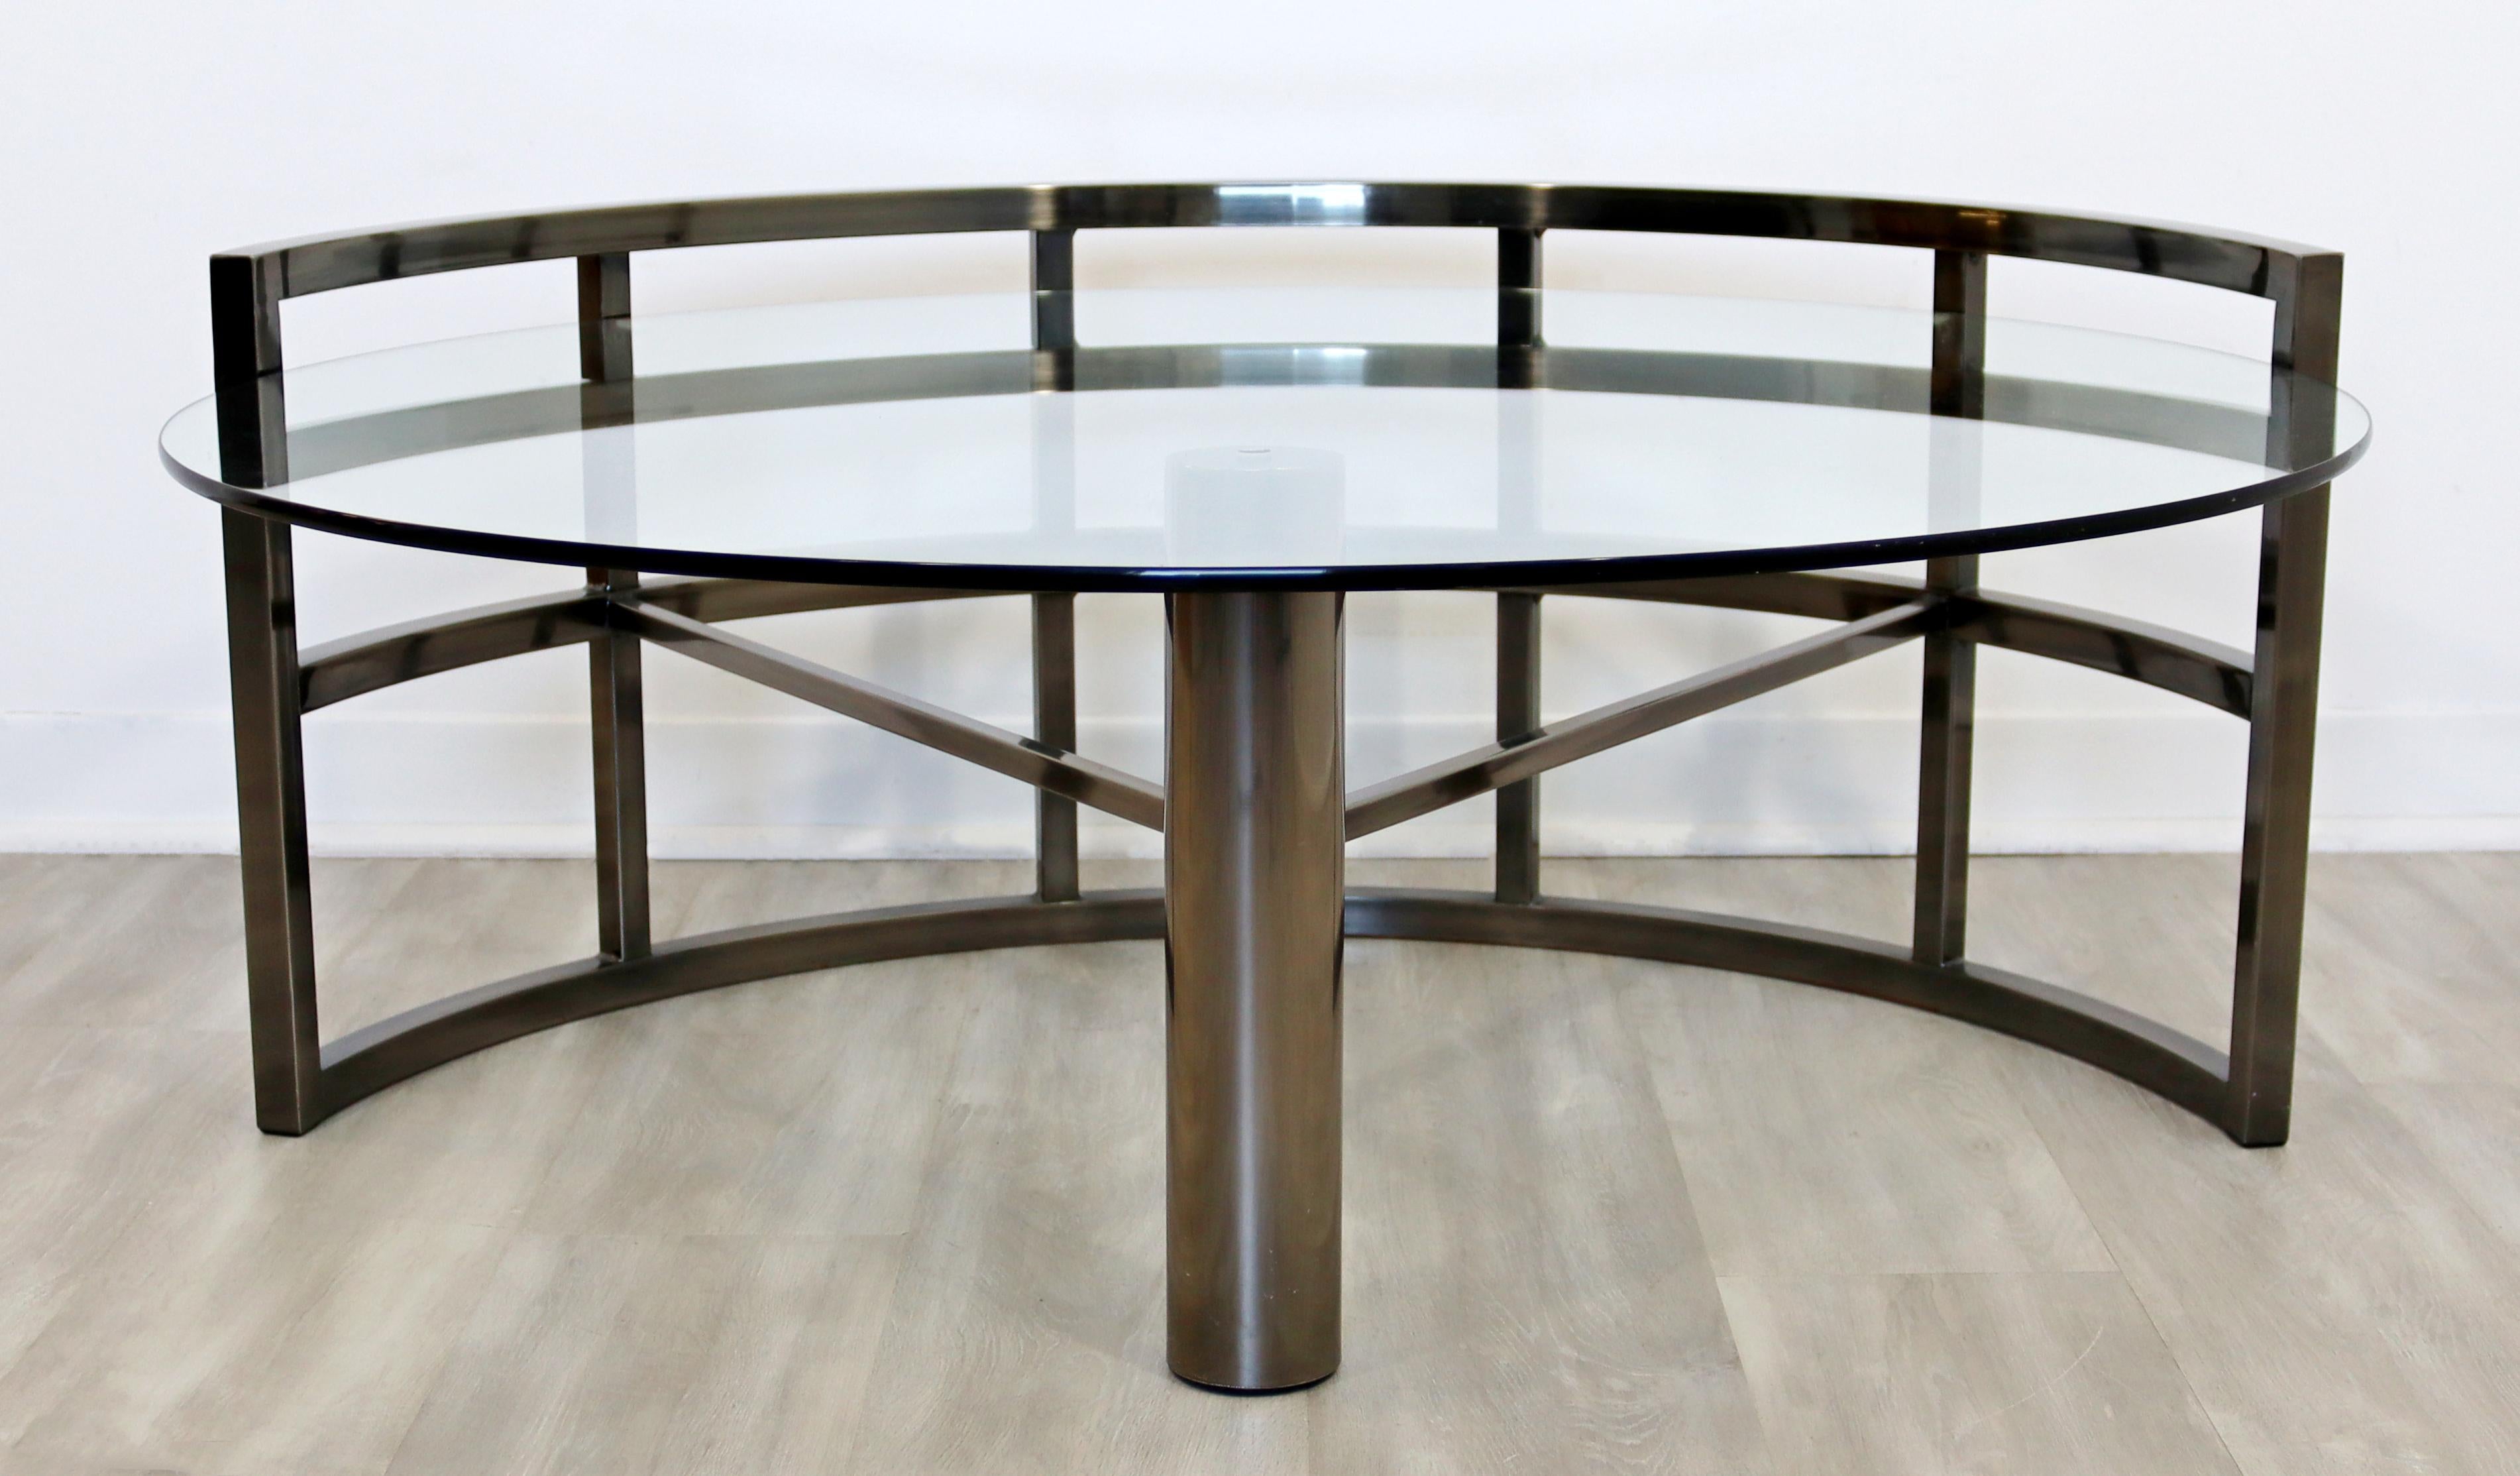 For your consideration is an outstanding, asymmetrical coffee table, with a glass top in a gunmetal base, circa the 1980s, in the style of Brueton. In excellent vintage condition. The dimensions are 42